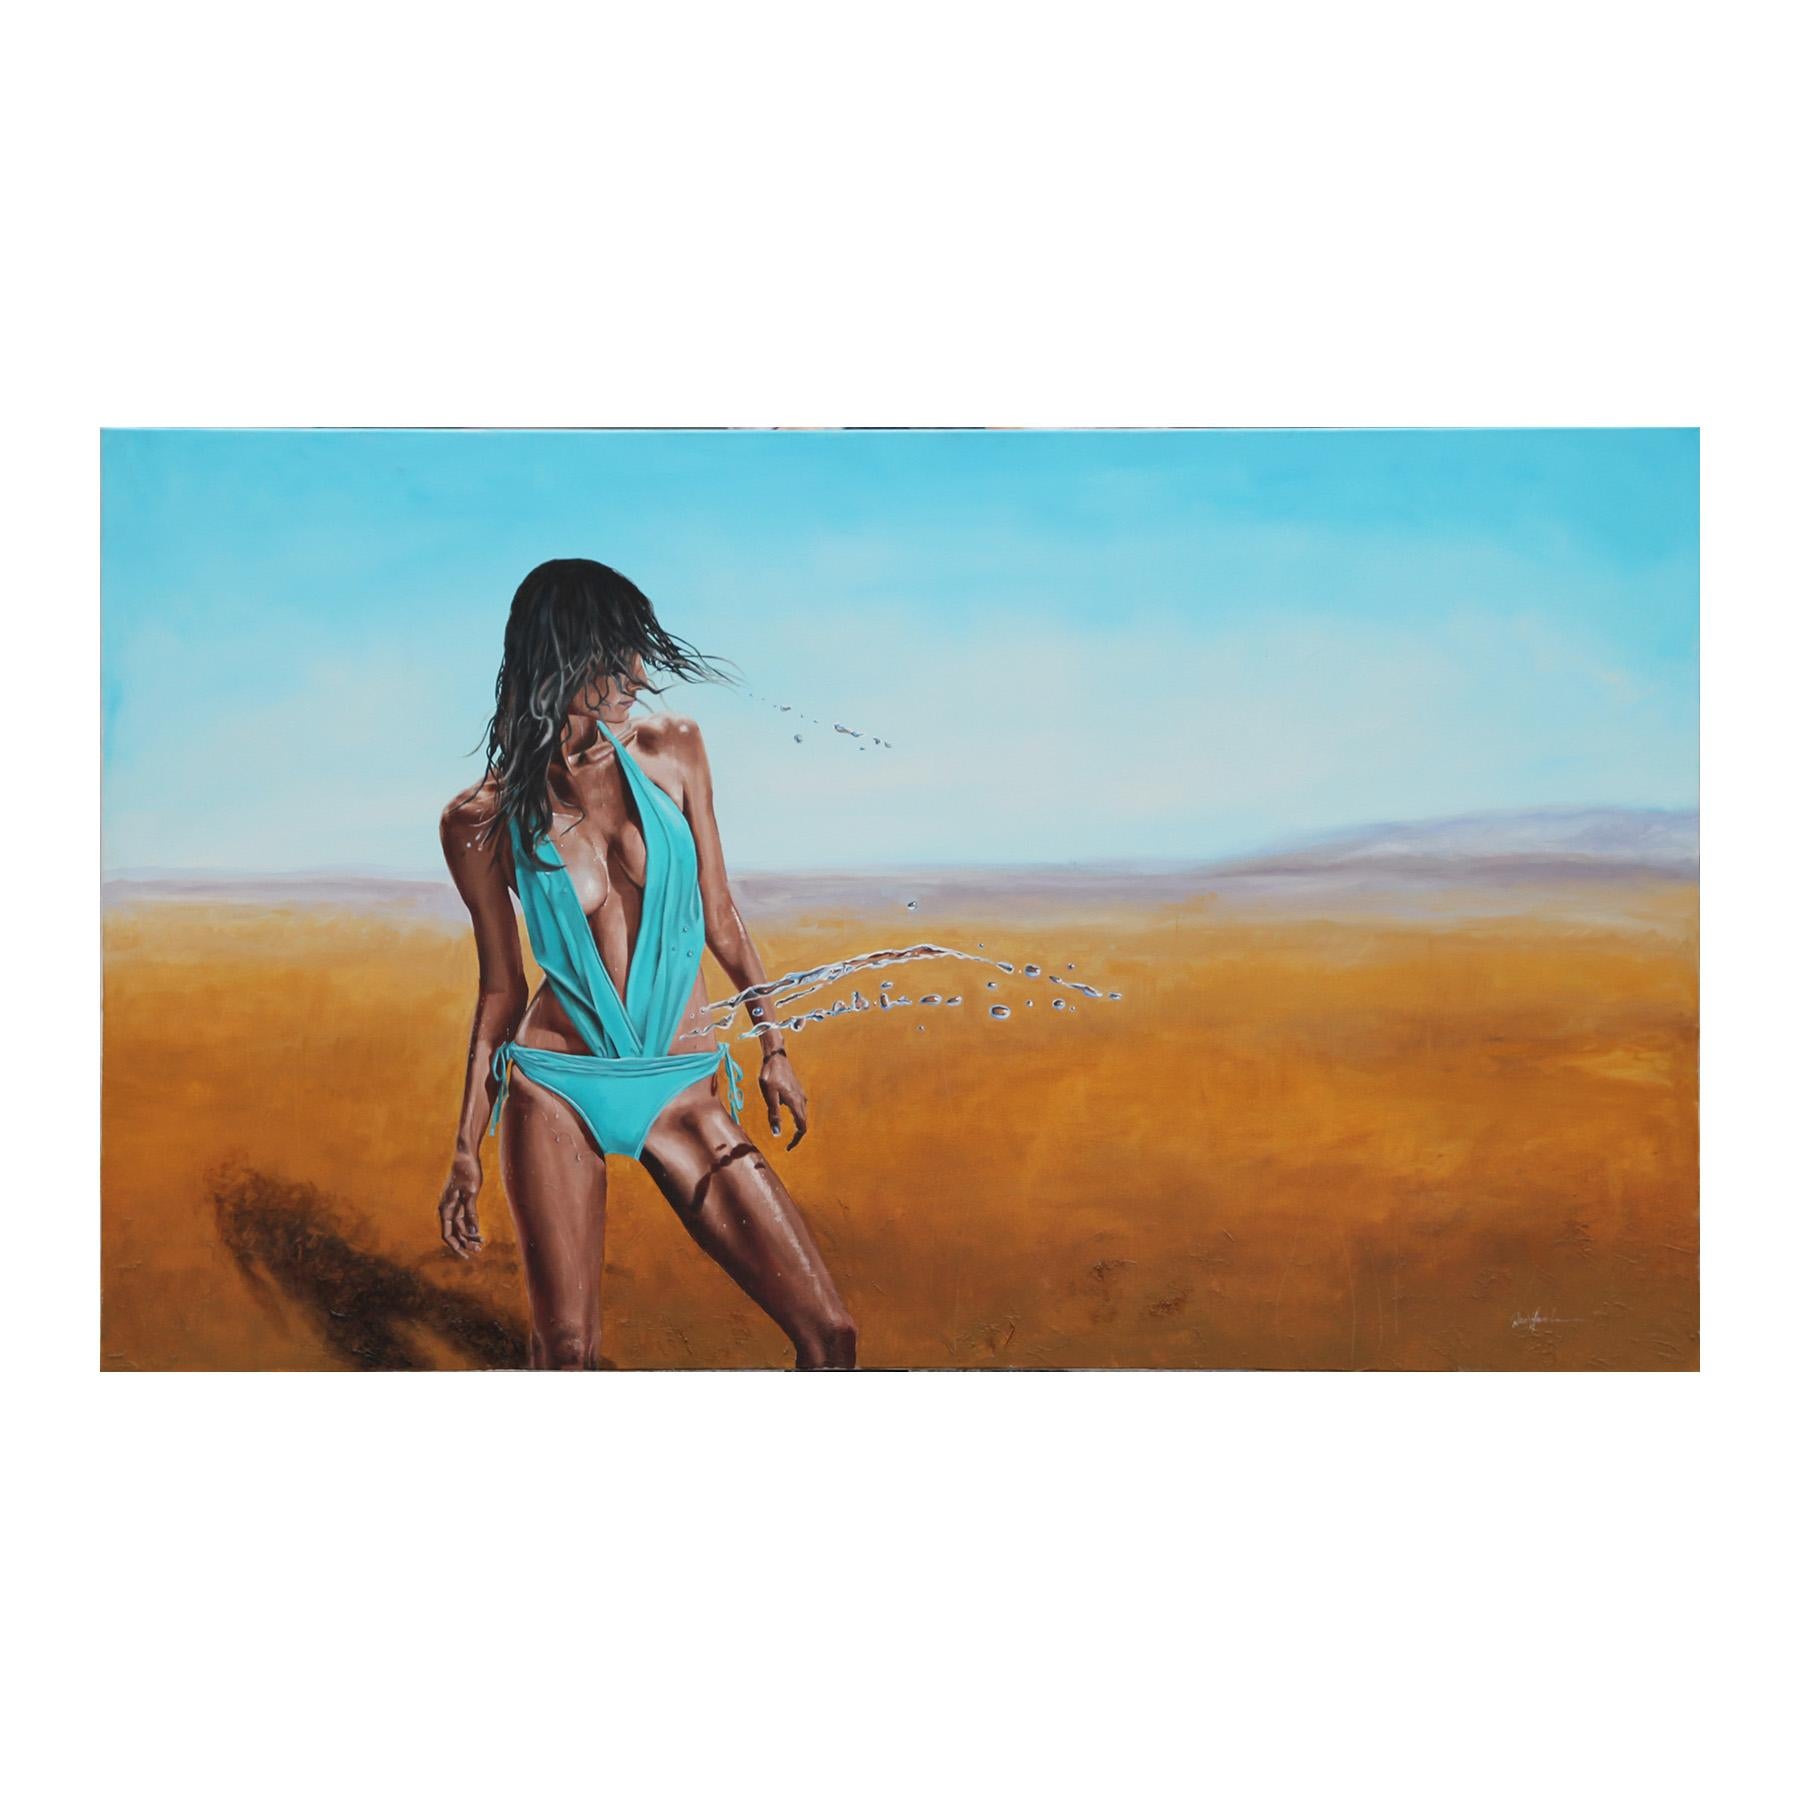 David Hardaker Figurative Painting - "The Water Carrier" Realist Portrait of a Woman with Water in the Desert 